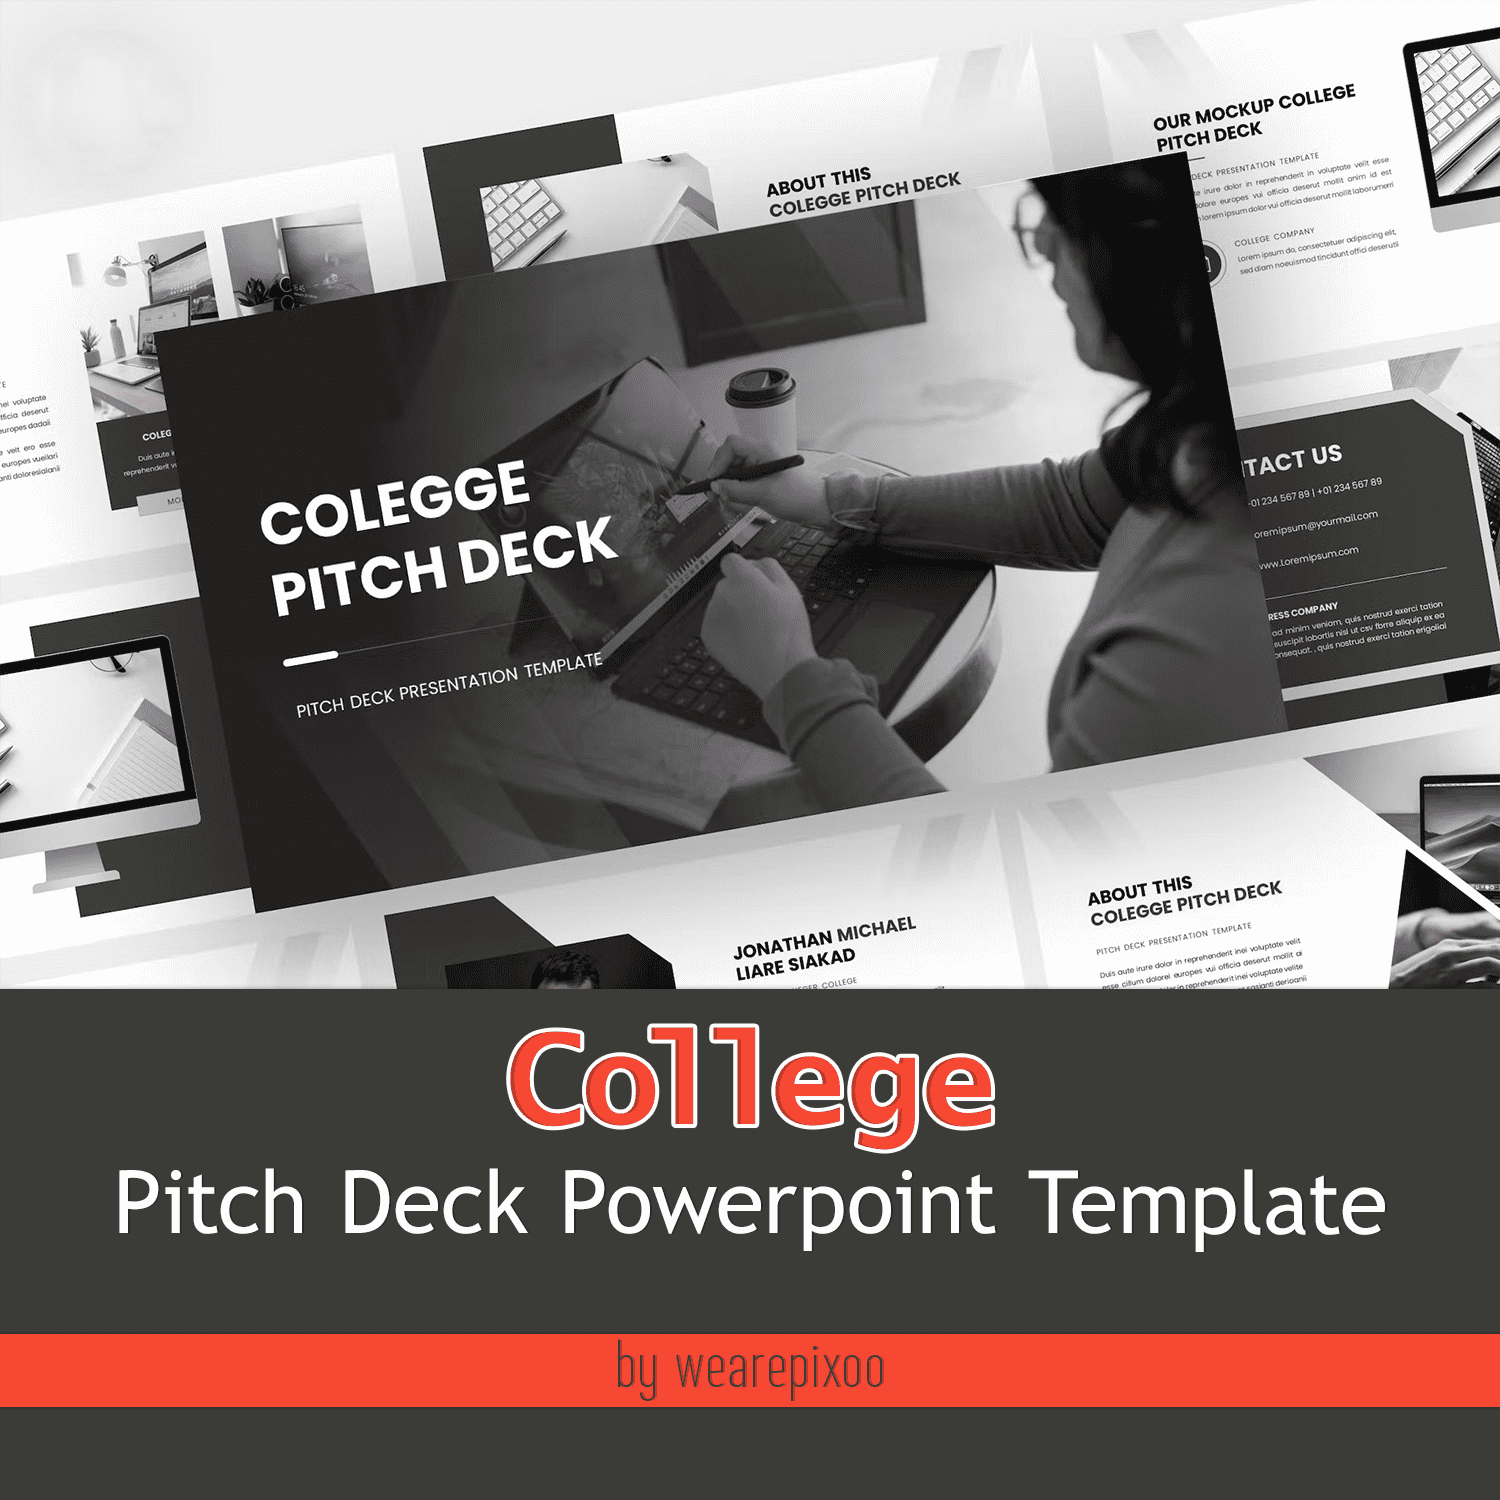 College Pitch Deck Powerpoint Template created by wearepixoo.